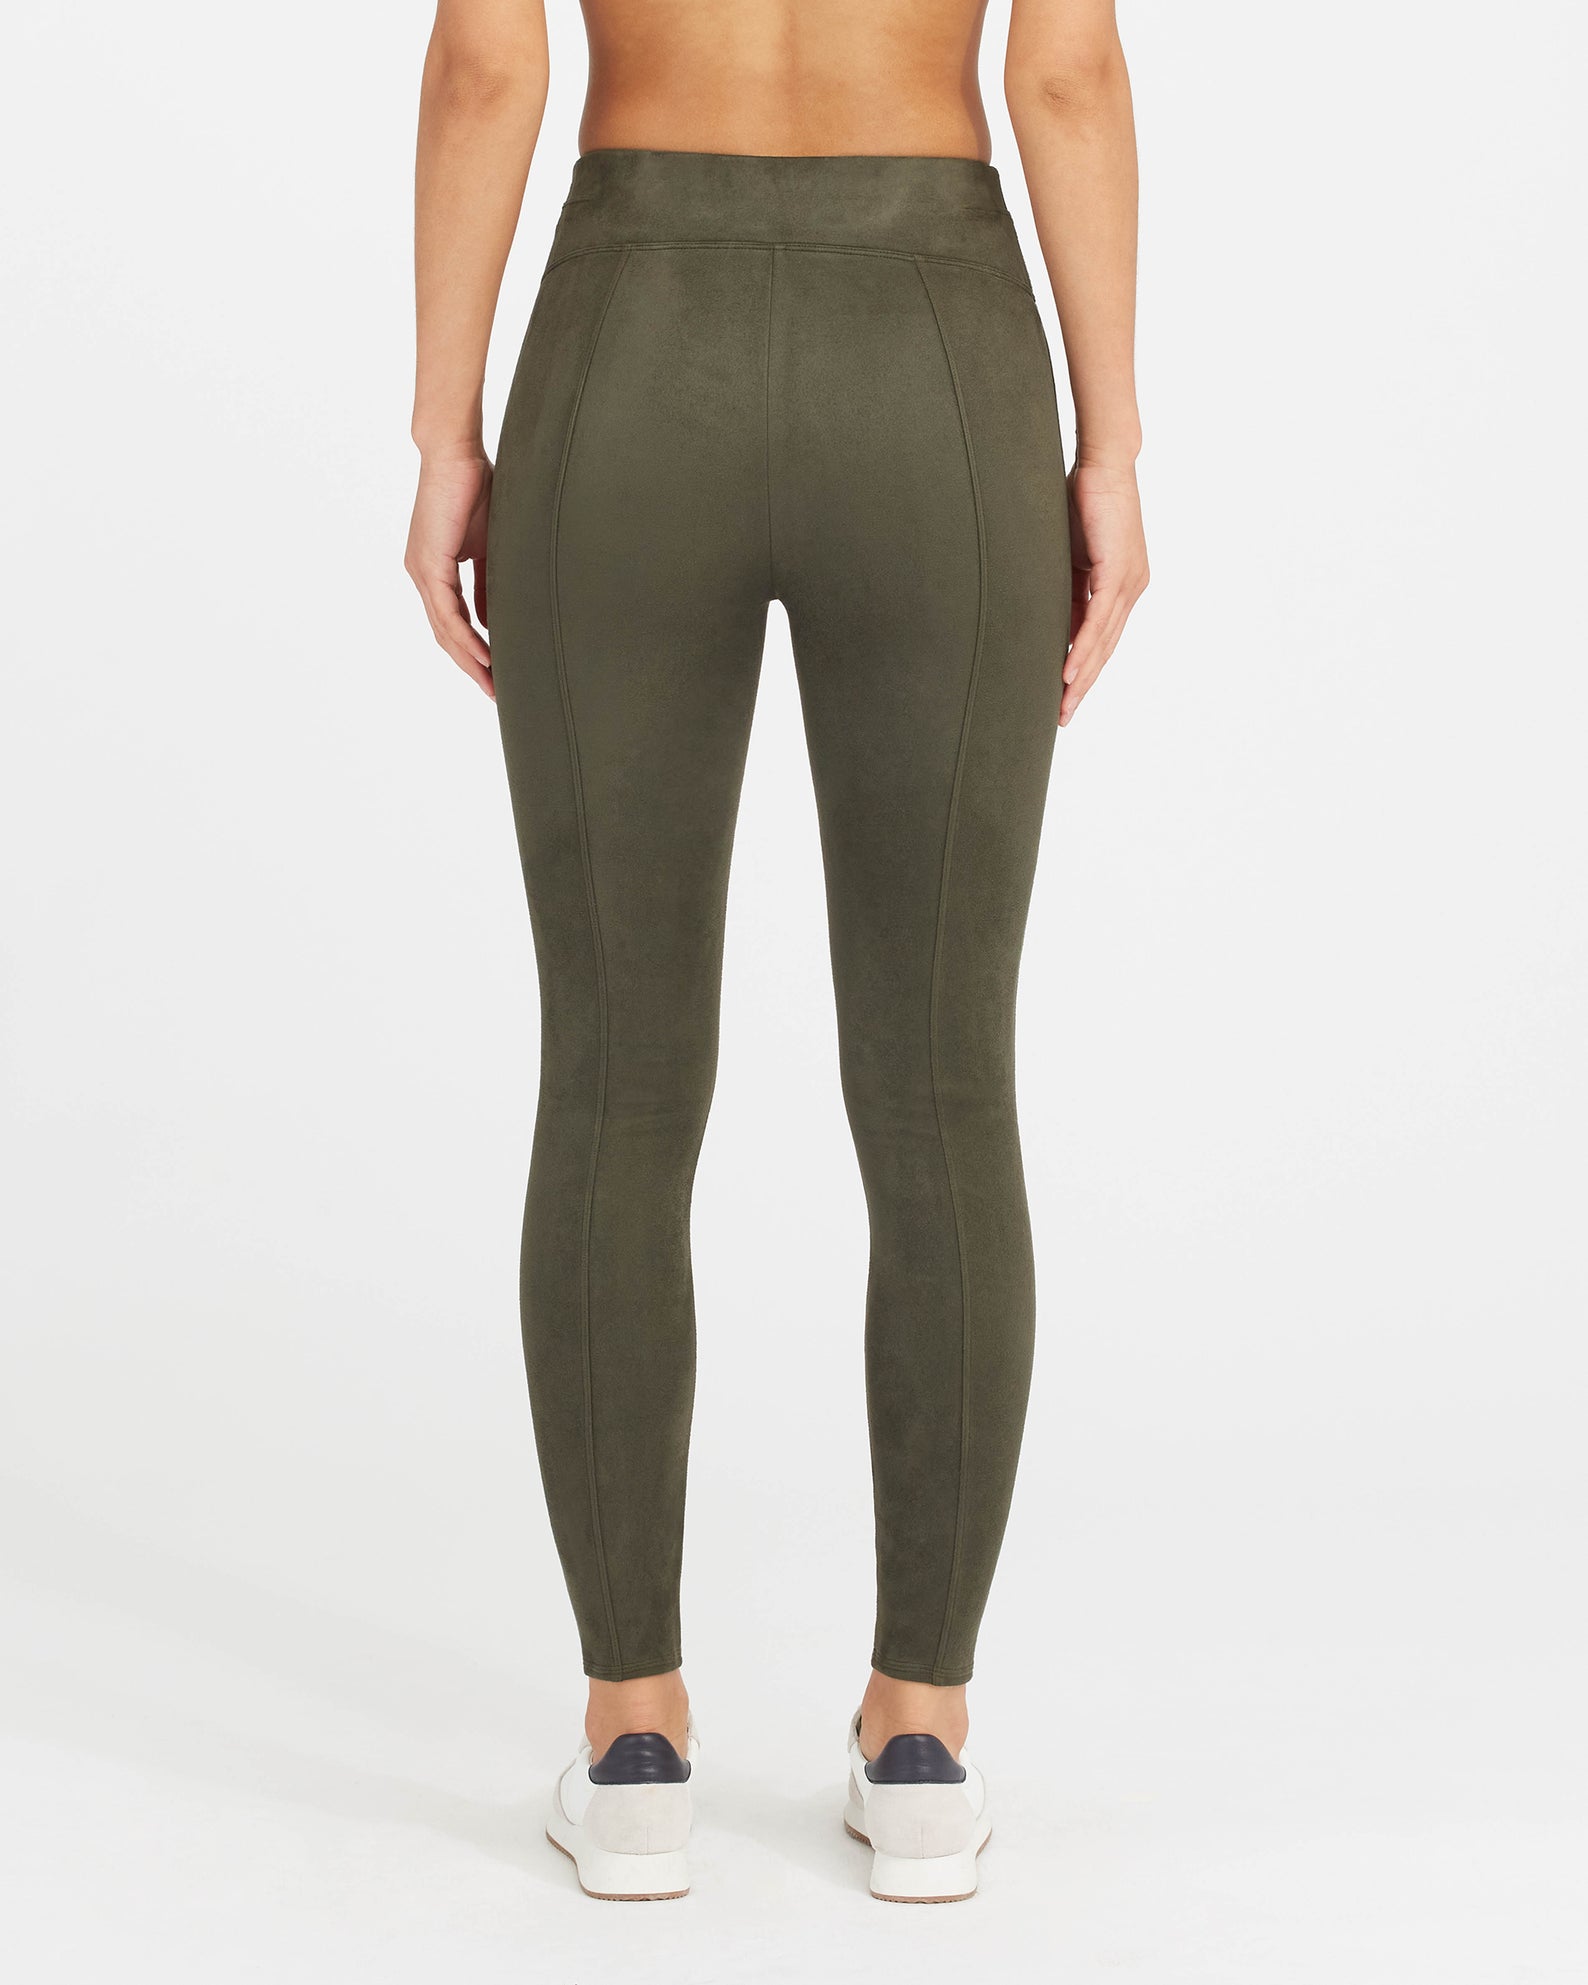 SPLENDID Military High Waisted Faux Suede Leggings - Olive Green